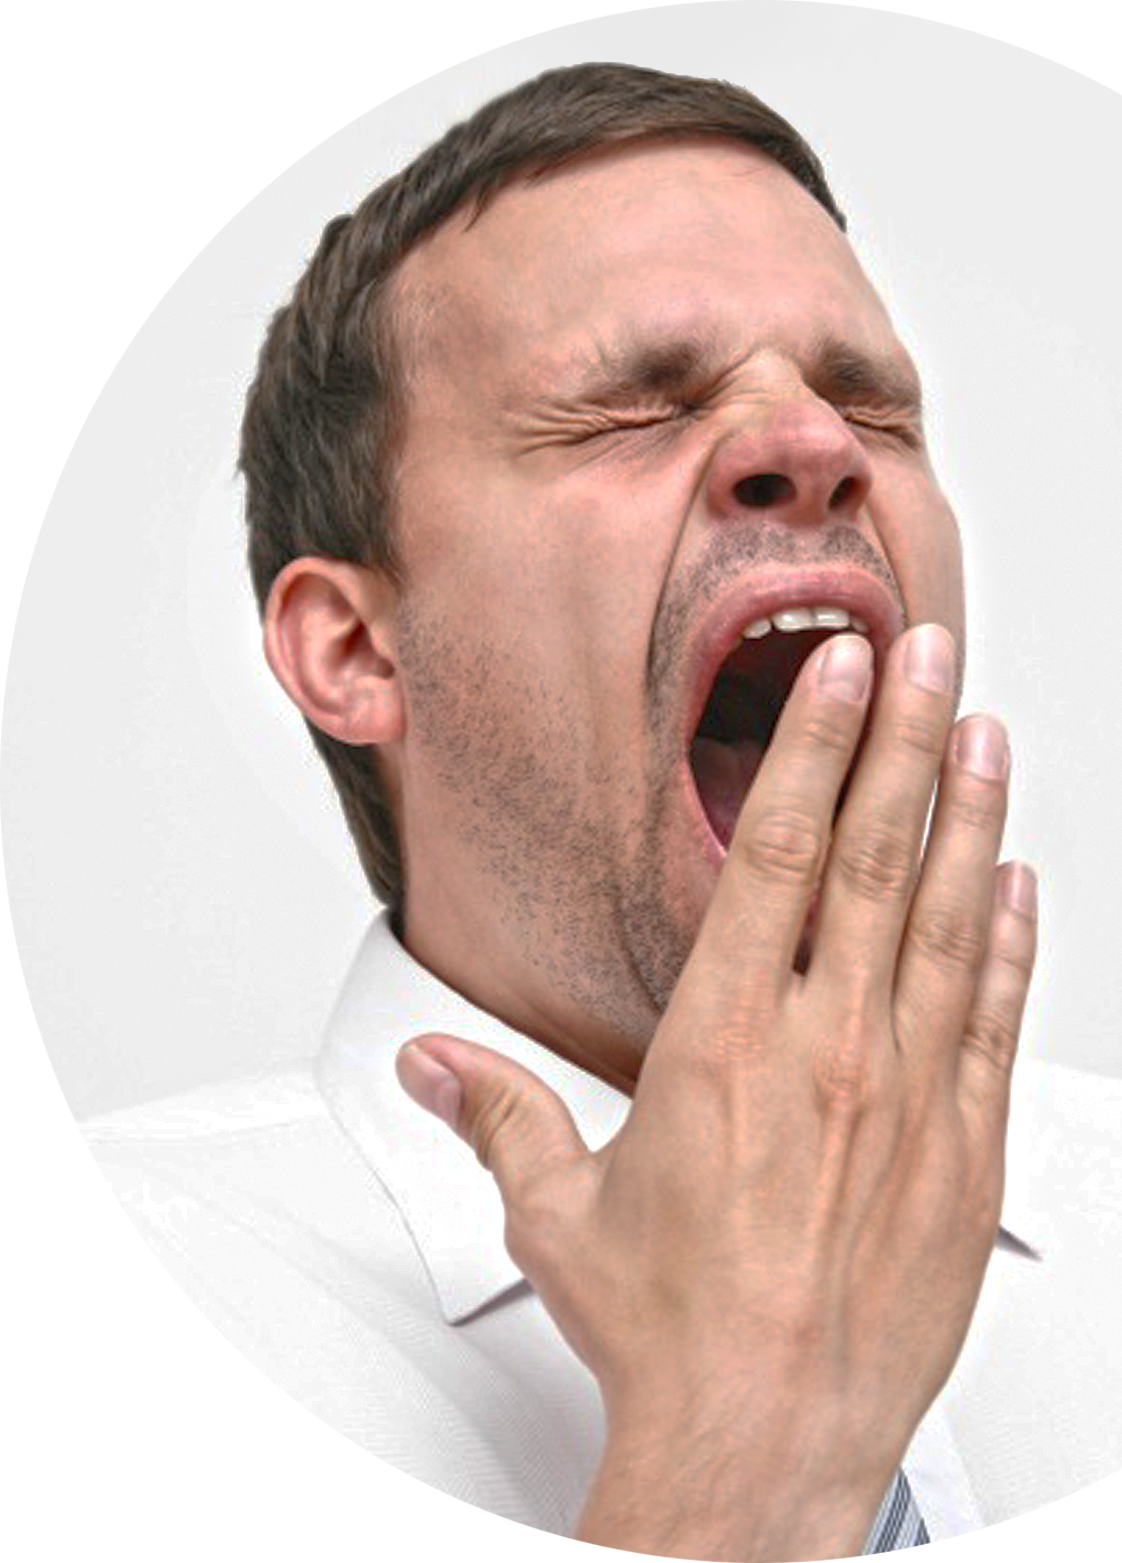 http://gldentistry.com/wp-content/uploads/2016/06/Man-Yawning.png